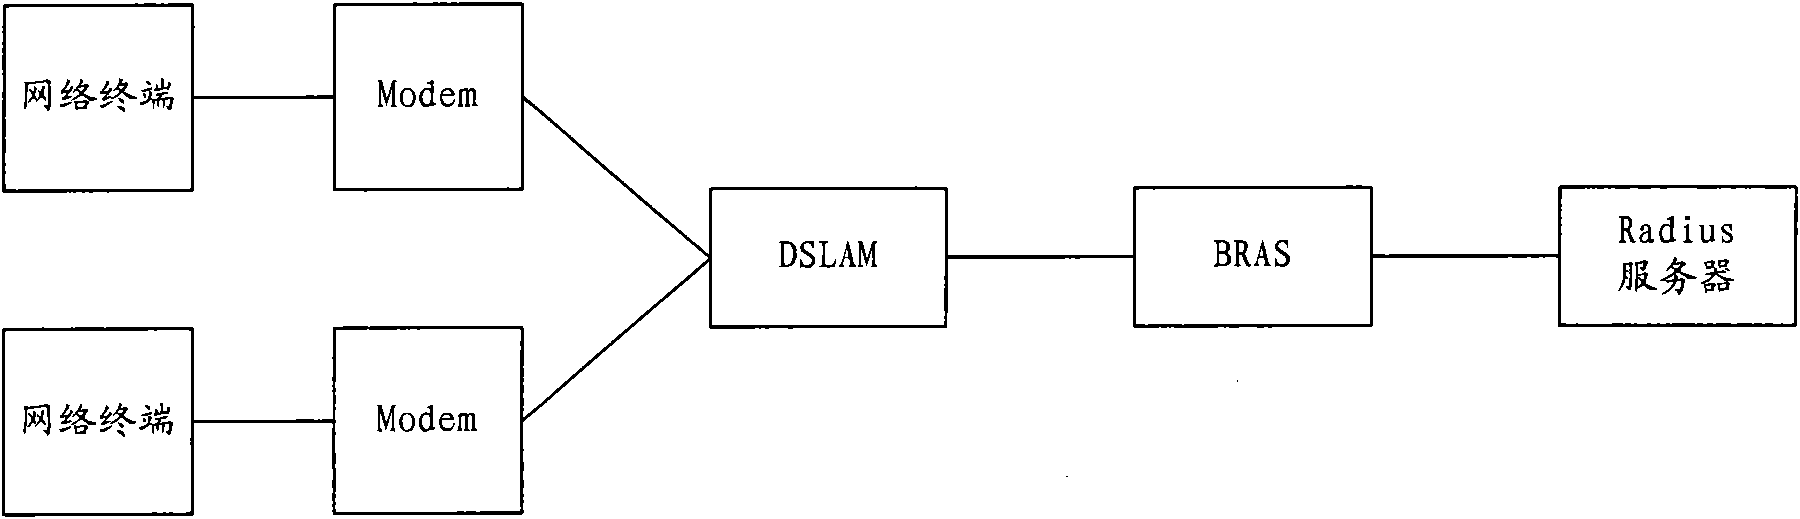 Broadband network access method and system, DSLAM (Digital Subscriber Line Access Multiplexer) and BRAS (Broadband Remote Access Server)